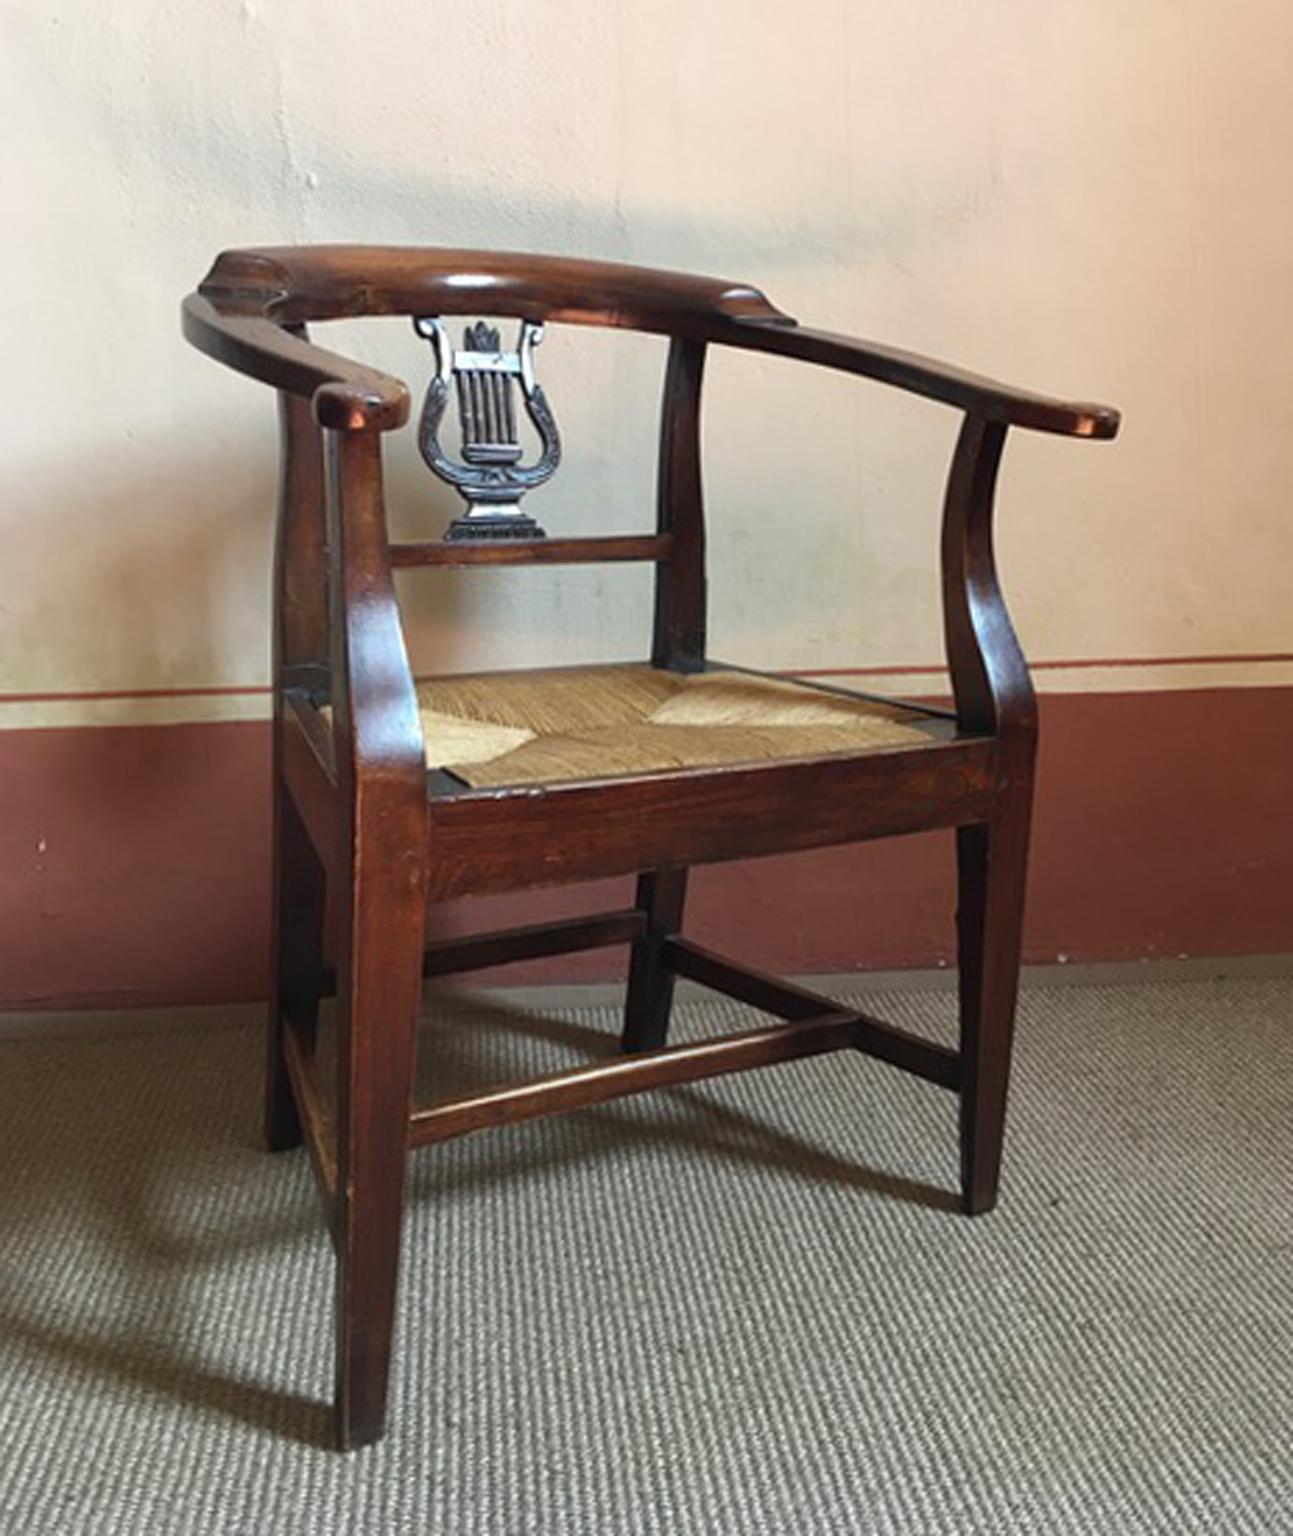 This elegant and not usual armchair was hand carved in solid walnut, in the 18th century in the Northern part of Italy. Very pleasant decoration with the 